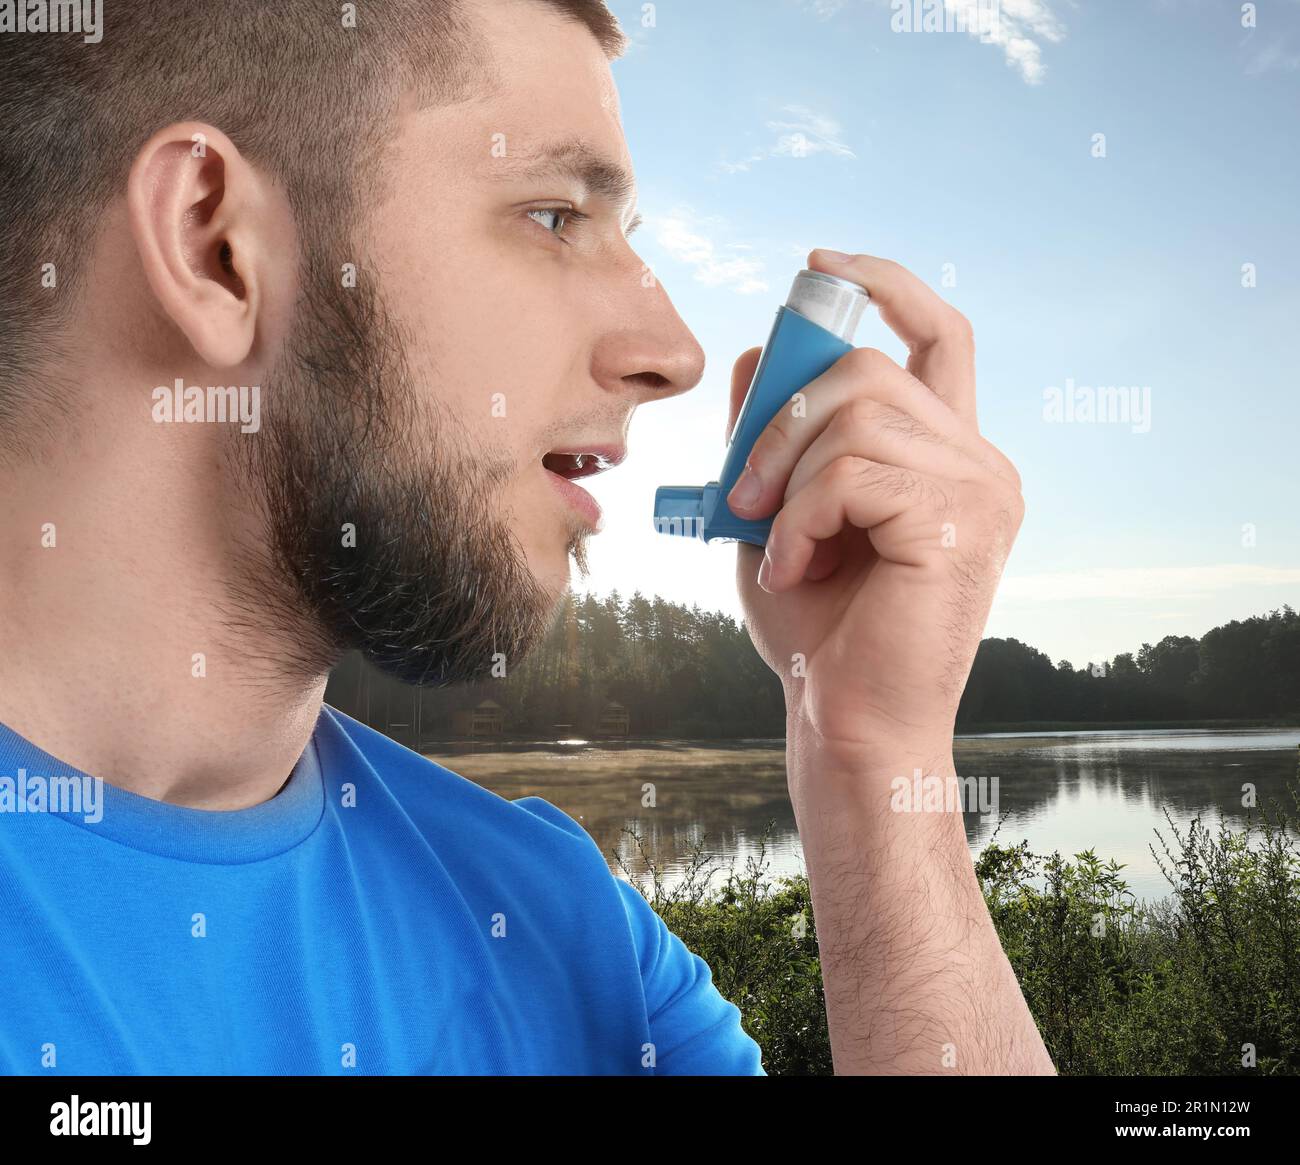 Man using asthma inhaler near lake. Emergency first aid during outdoor recreation Stock Photo